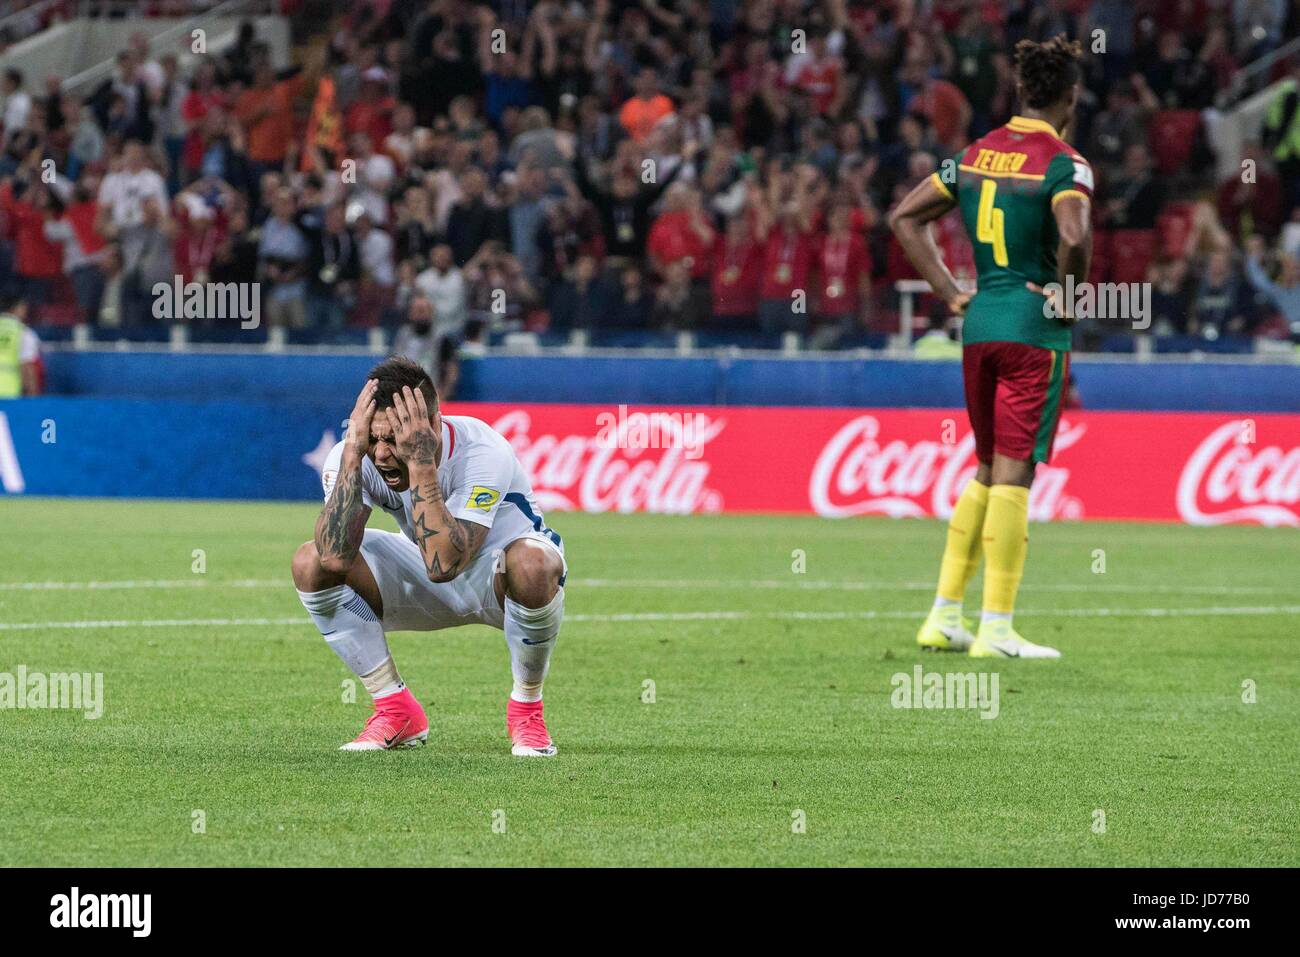 Moscow, Russia. 18th June, 2017. Chile's Eduardo Vargas (L) reacts during the 2017 Confederations Cup football Group B match against Cameroon in Moscow, Russia, June 18, 2017. Credit: Evgeny Sinitsyn/Xinhua/Alamy Live News Stock Photo